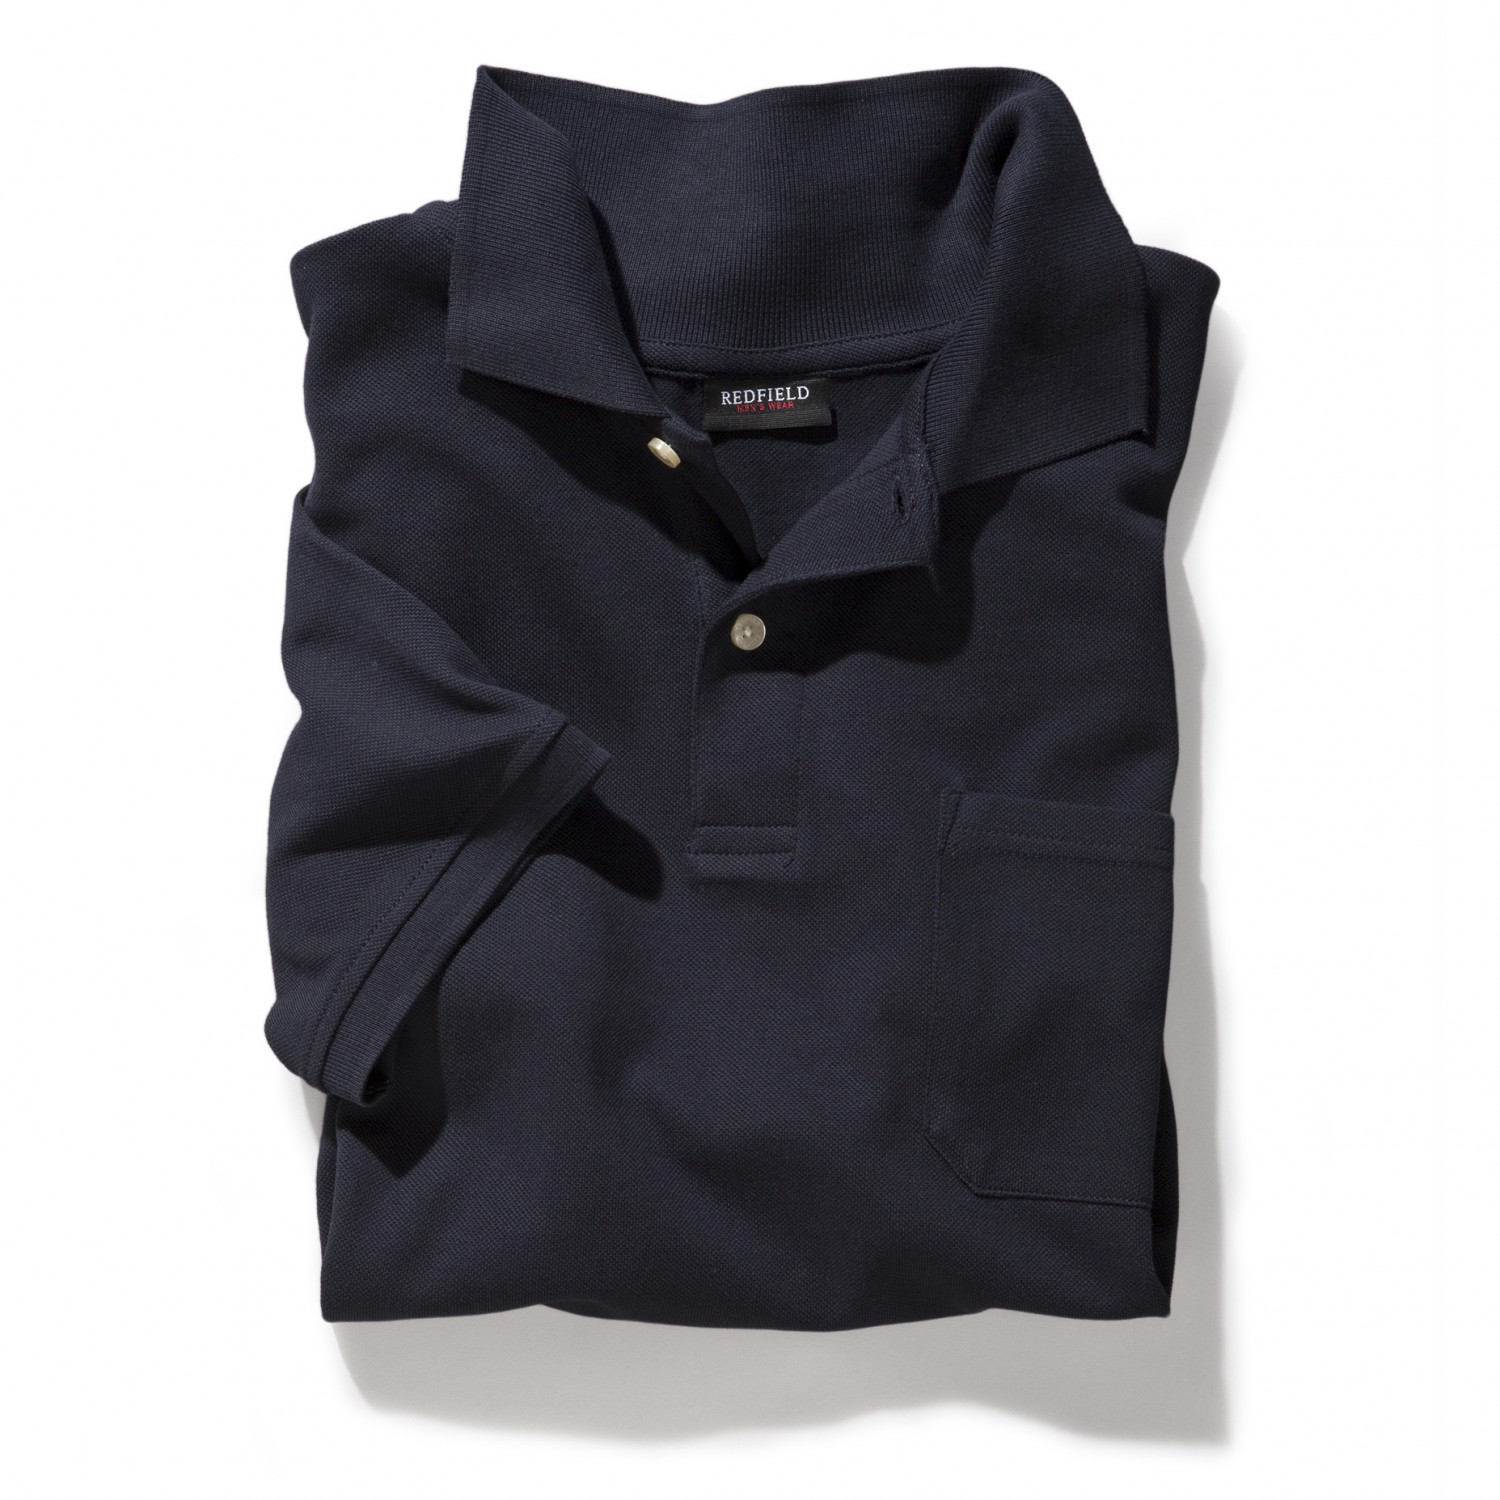 Polo shirt in dark blue by Redfield in extra large sizes until 10XL